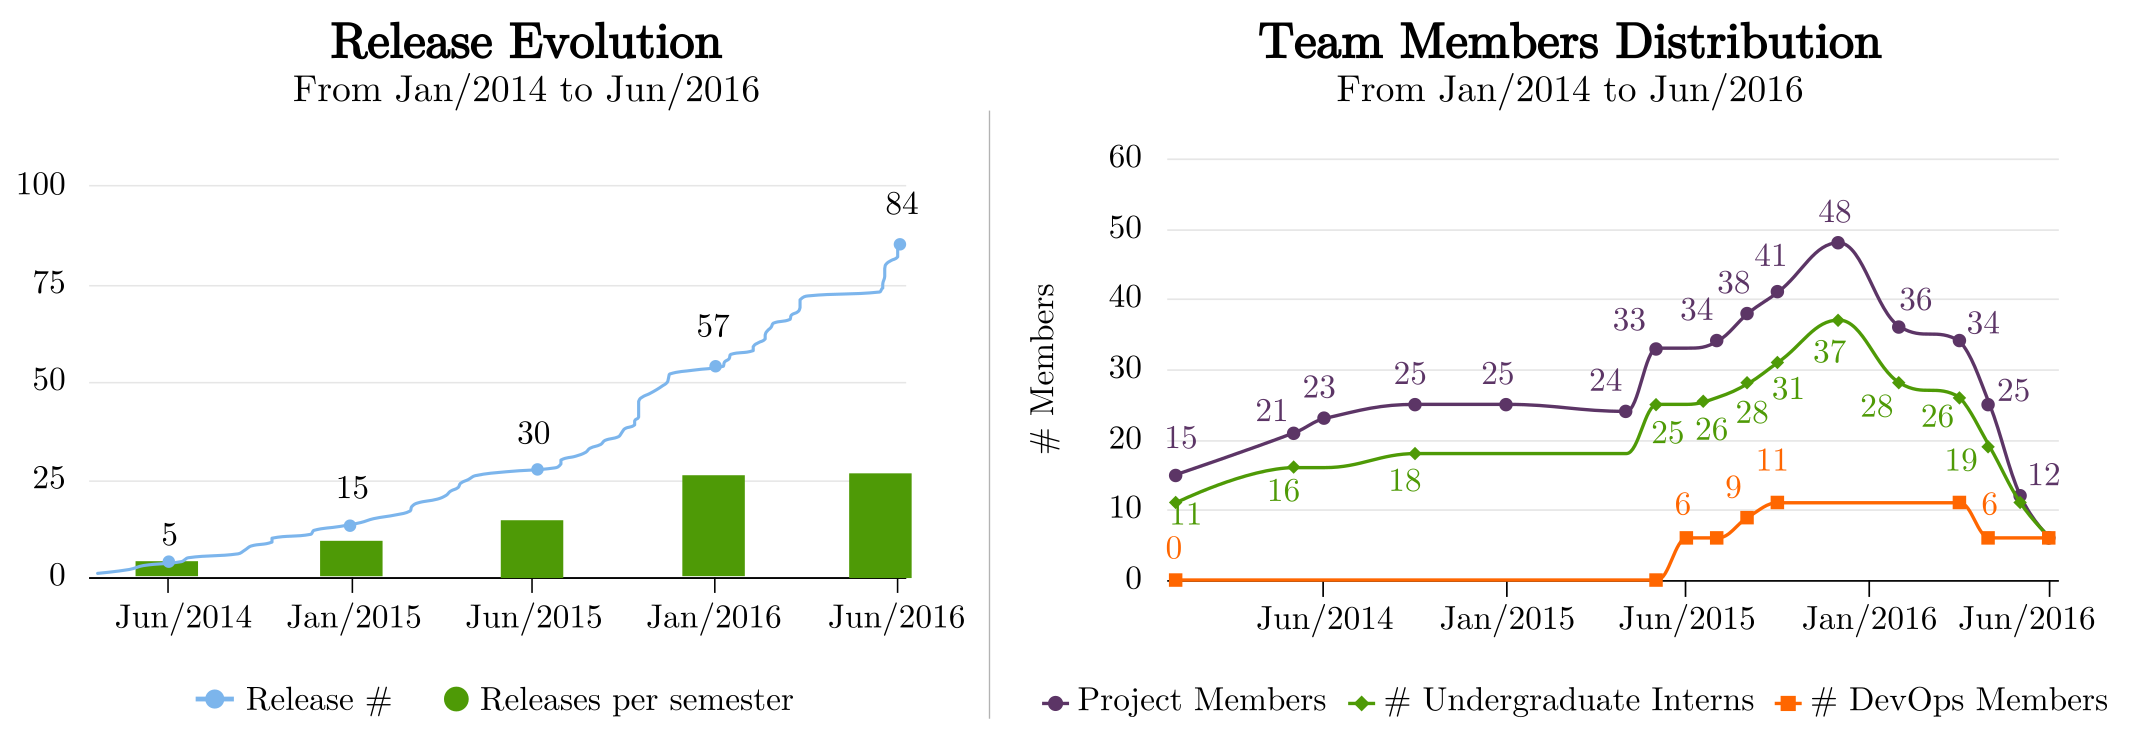 The evolution of SPB releases and the development team members distribution.